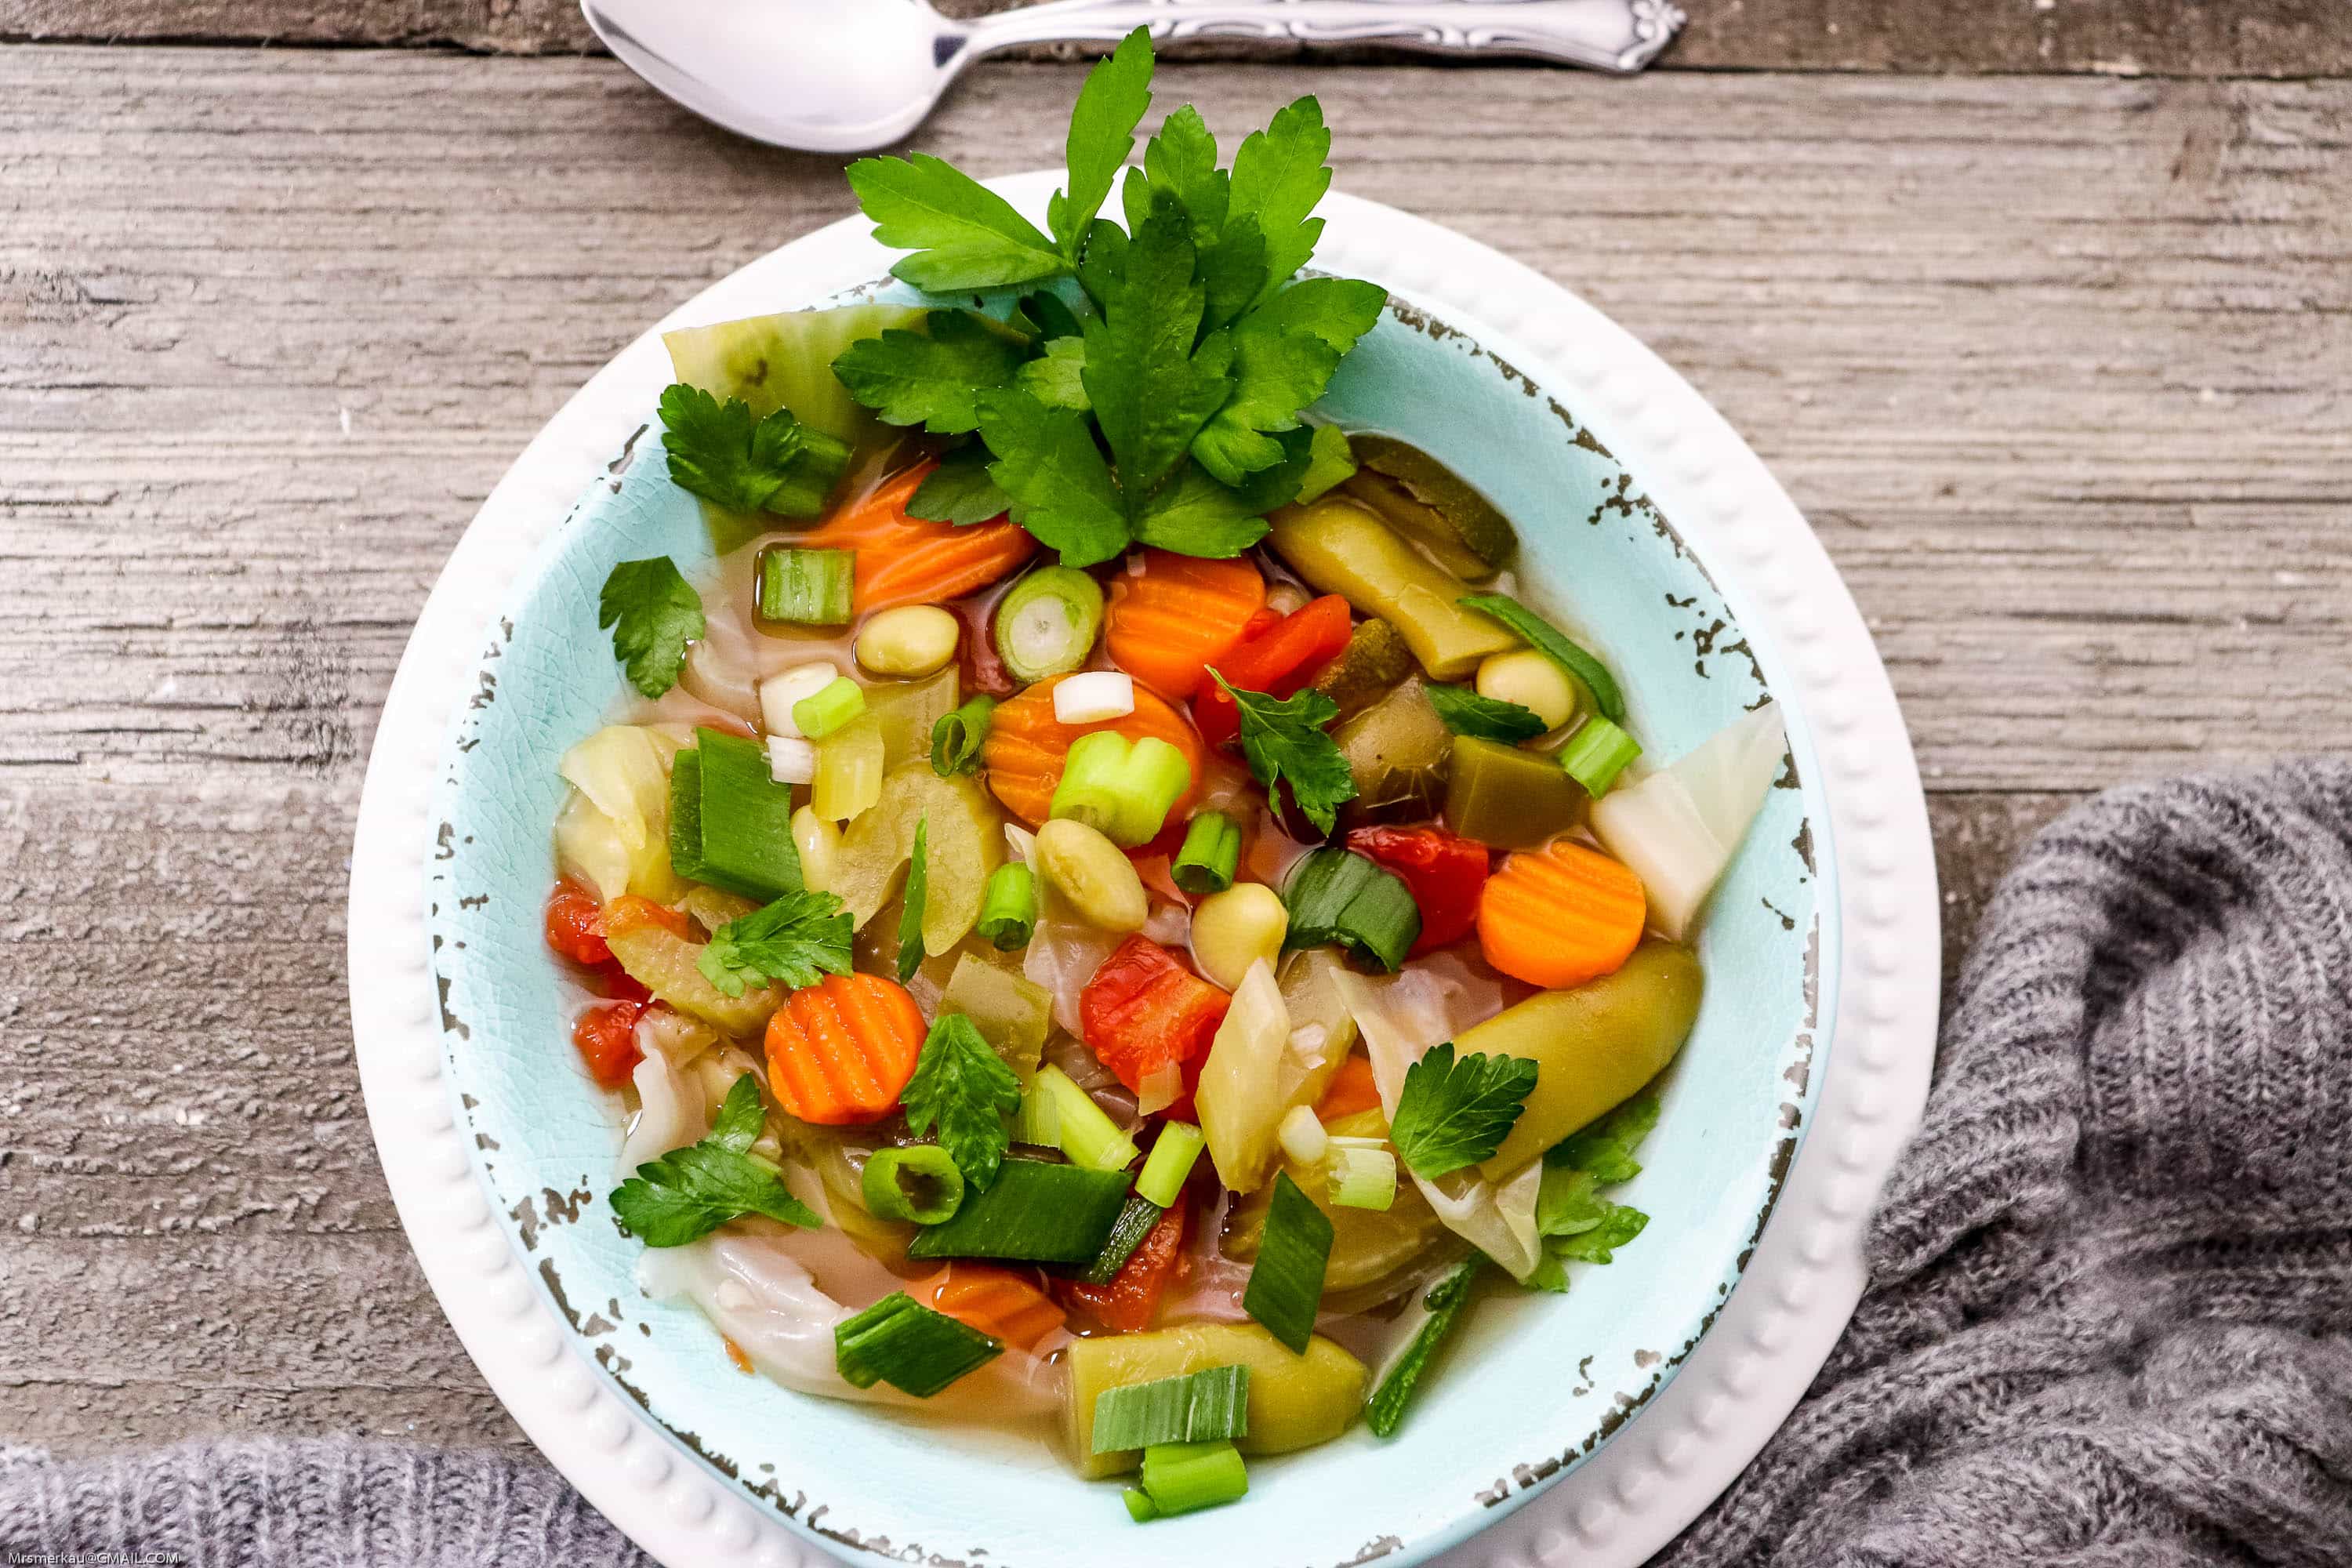 Check out this yummy and hearty homemade vegetable soup recipe filled with tons of nutrients and immunity building veggies! This vegetarian recipe will help fight the flu and is full of flavor! Easy to follow, you may already have all you need to make this yummy soup! #vegetablesoup #vegetarian #vegetables #healthyeating